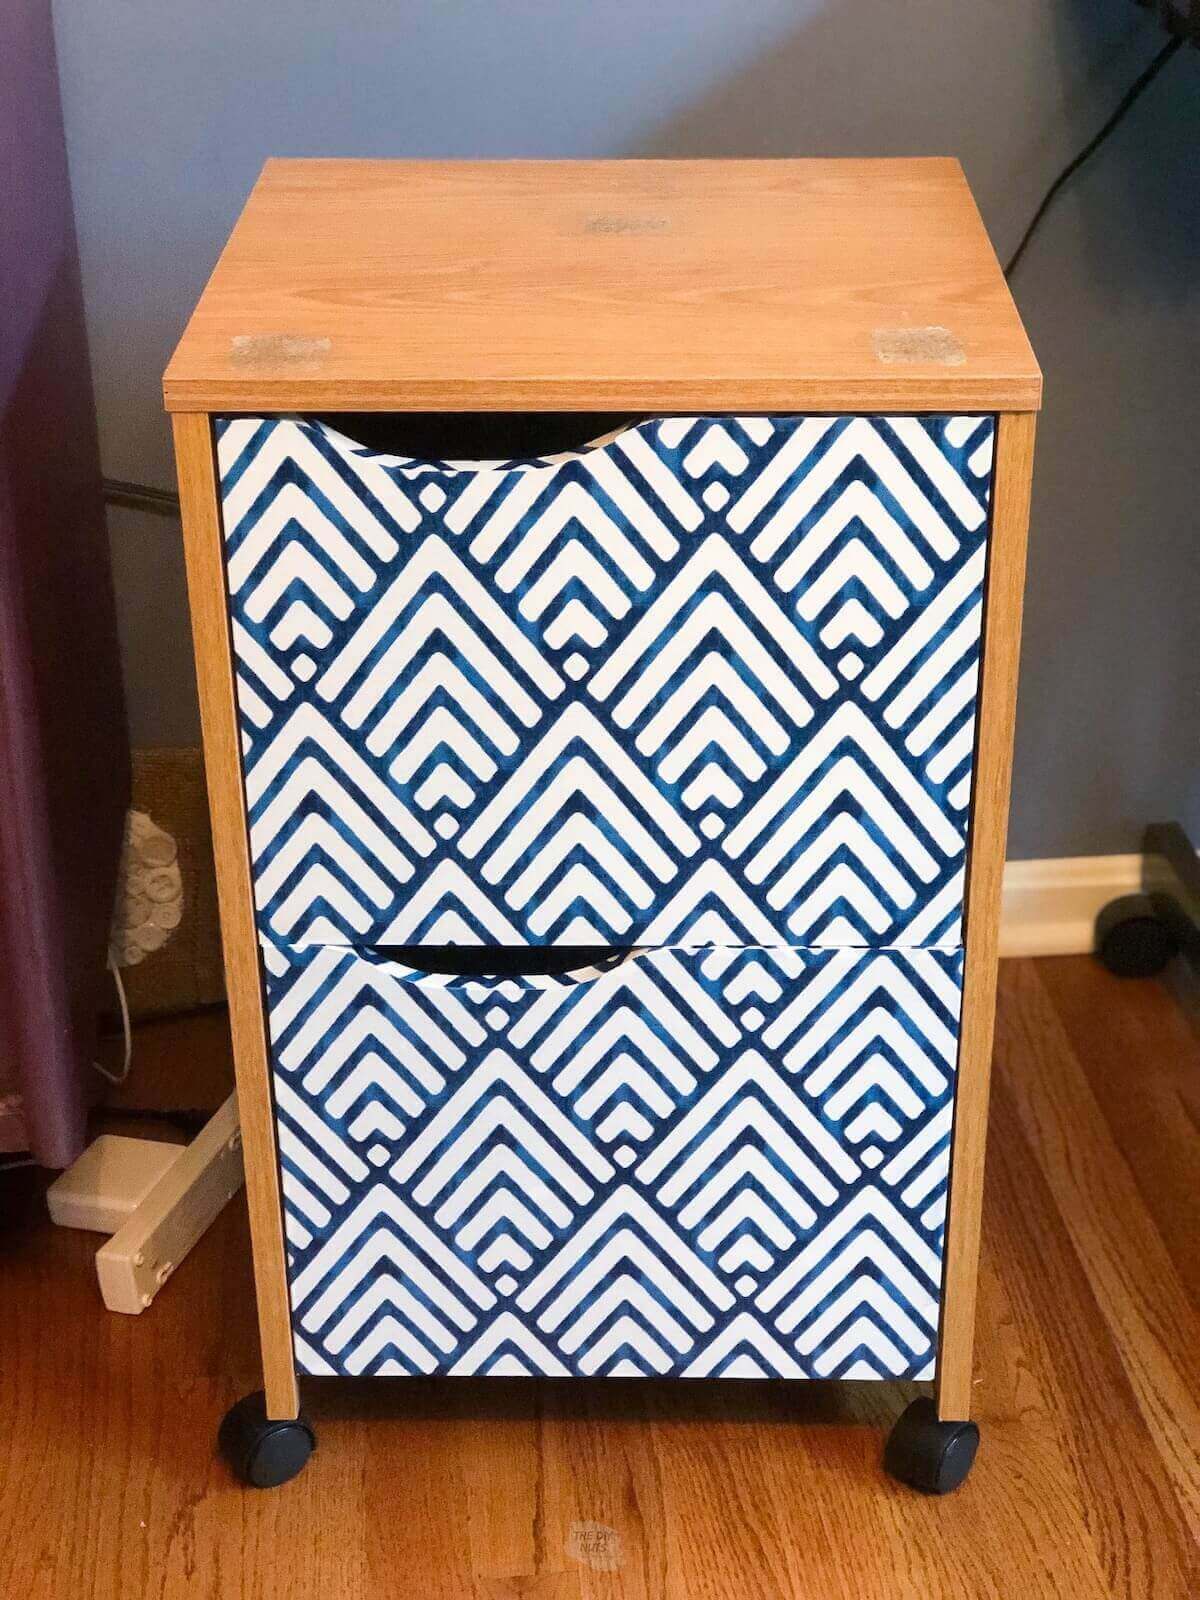 oak file cabinet with drawers covered in blue and white patterned contact paper.